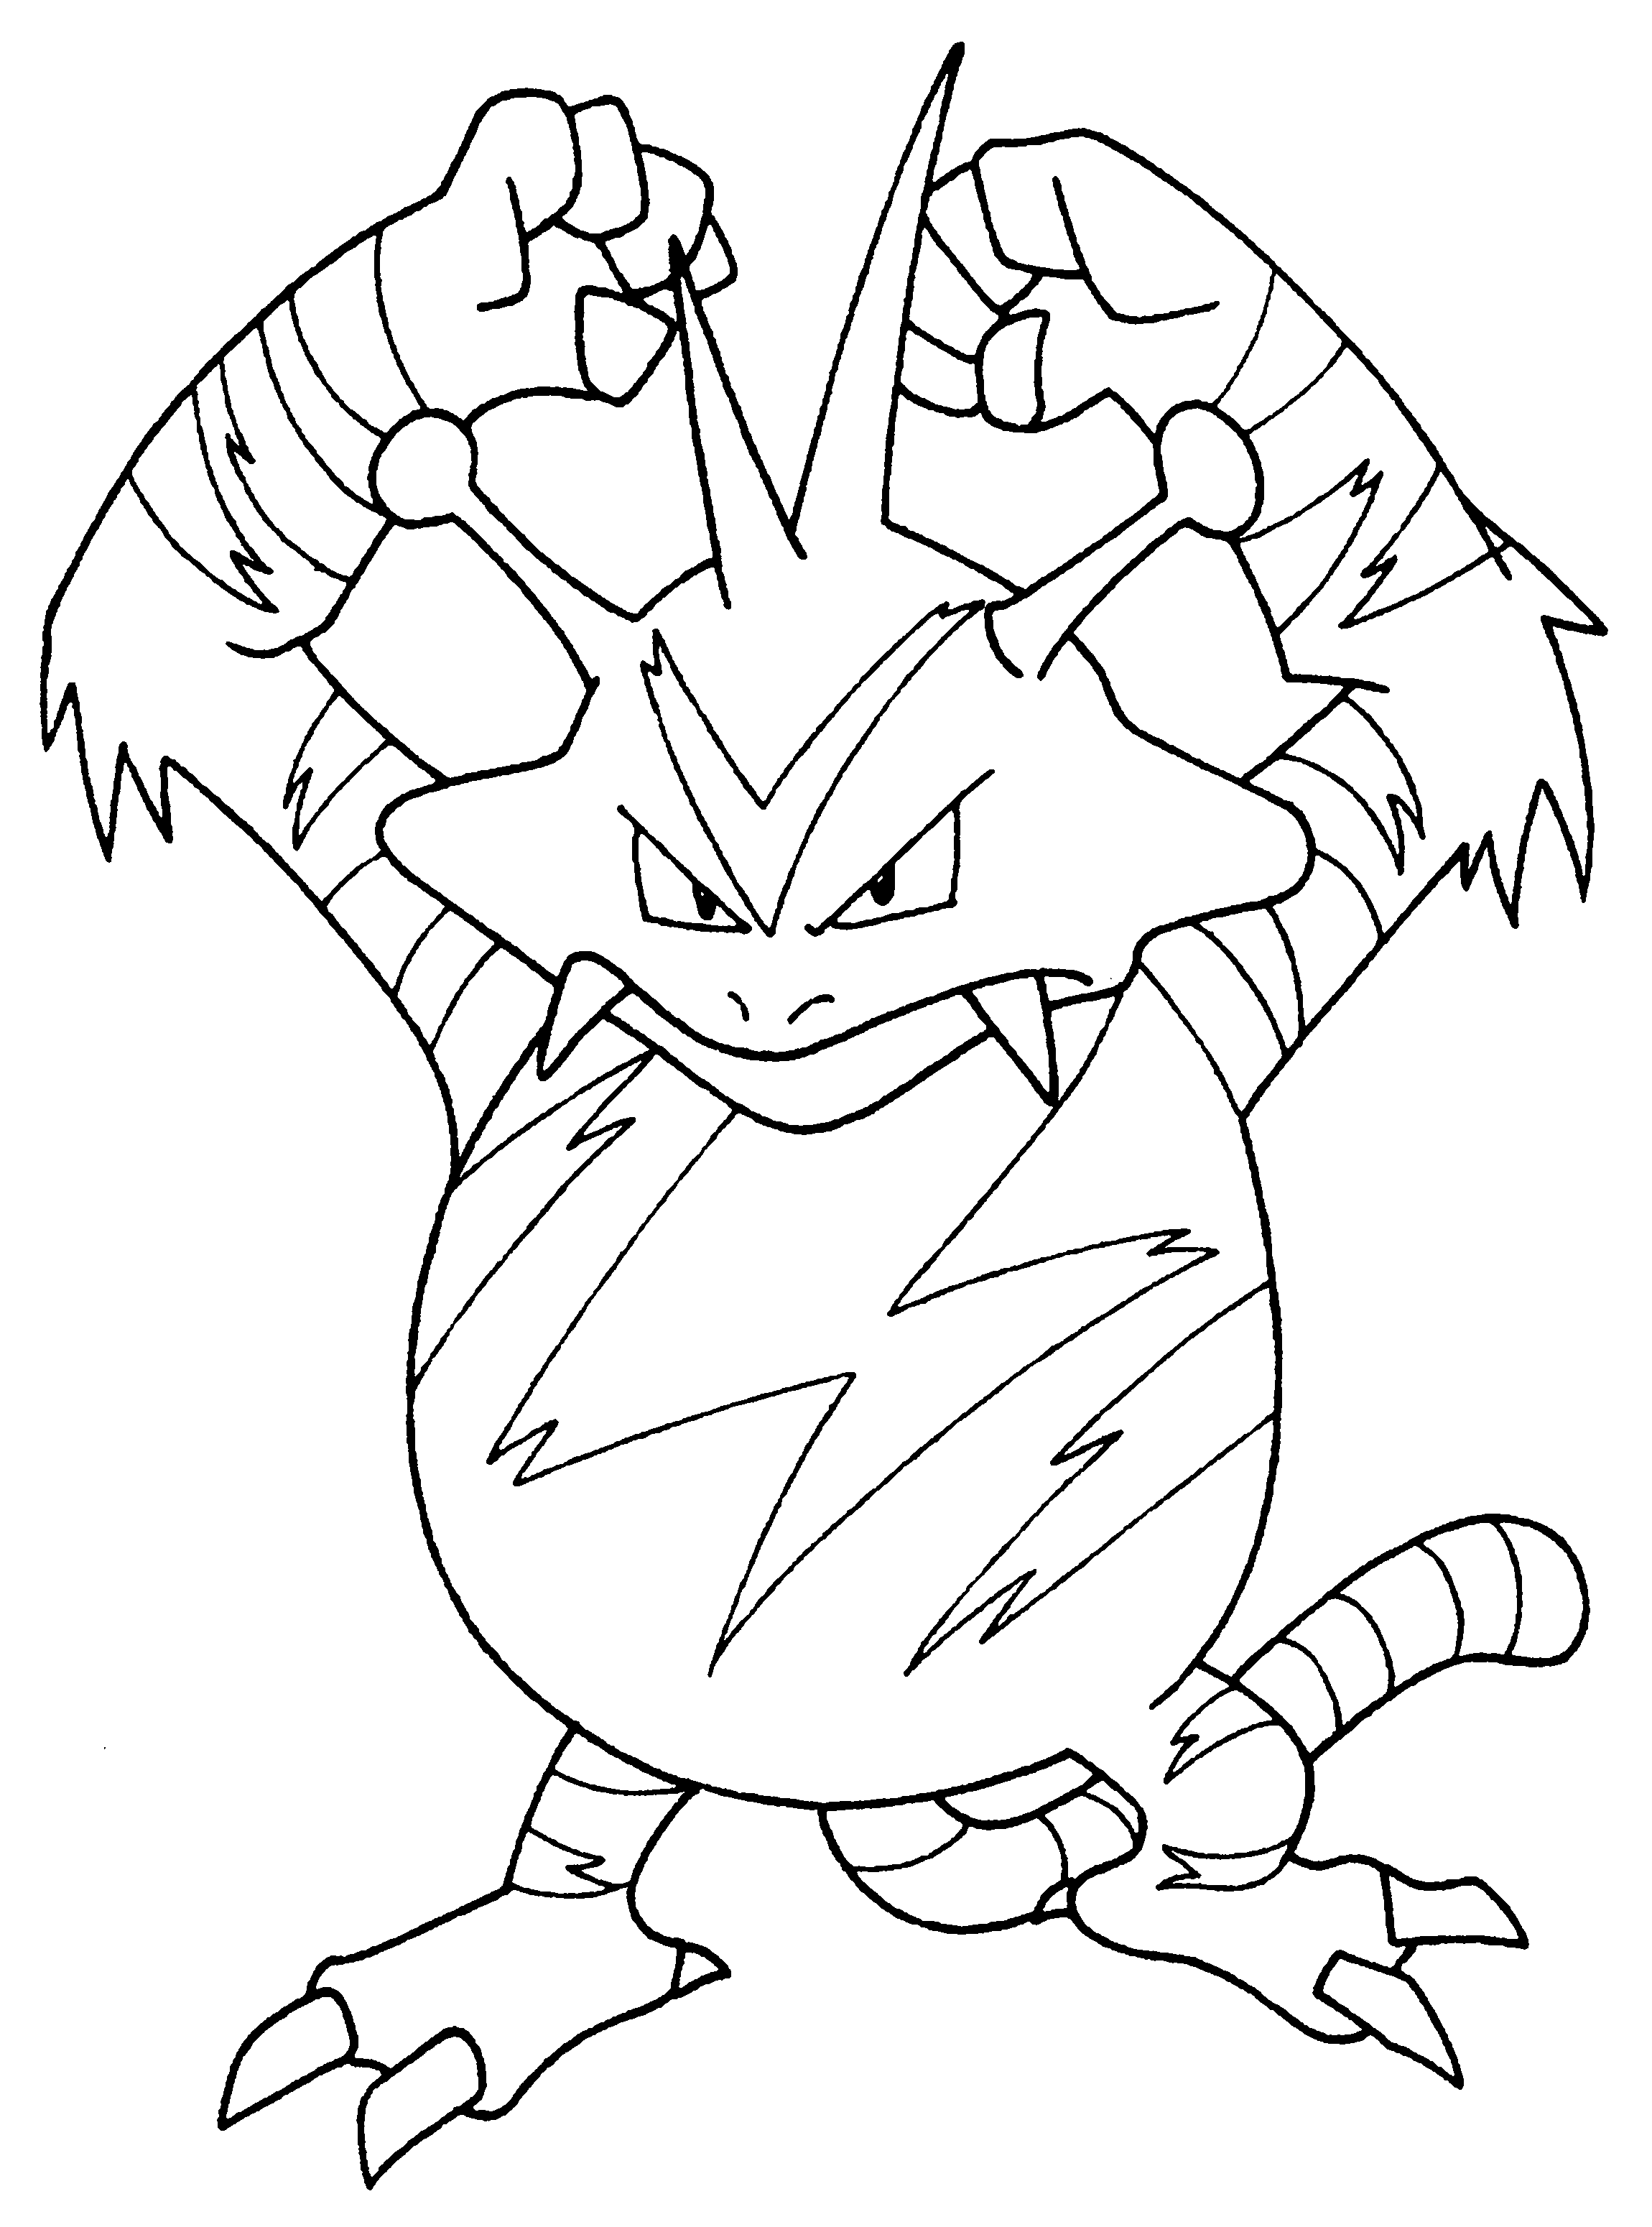 Free Printable Legendary Pokemon Coloring Pages - Coloring ...